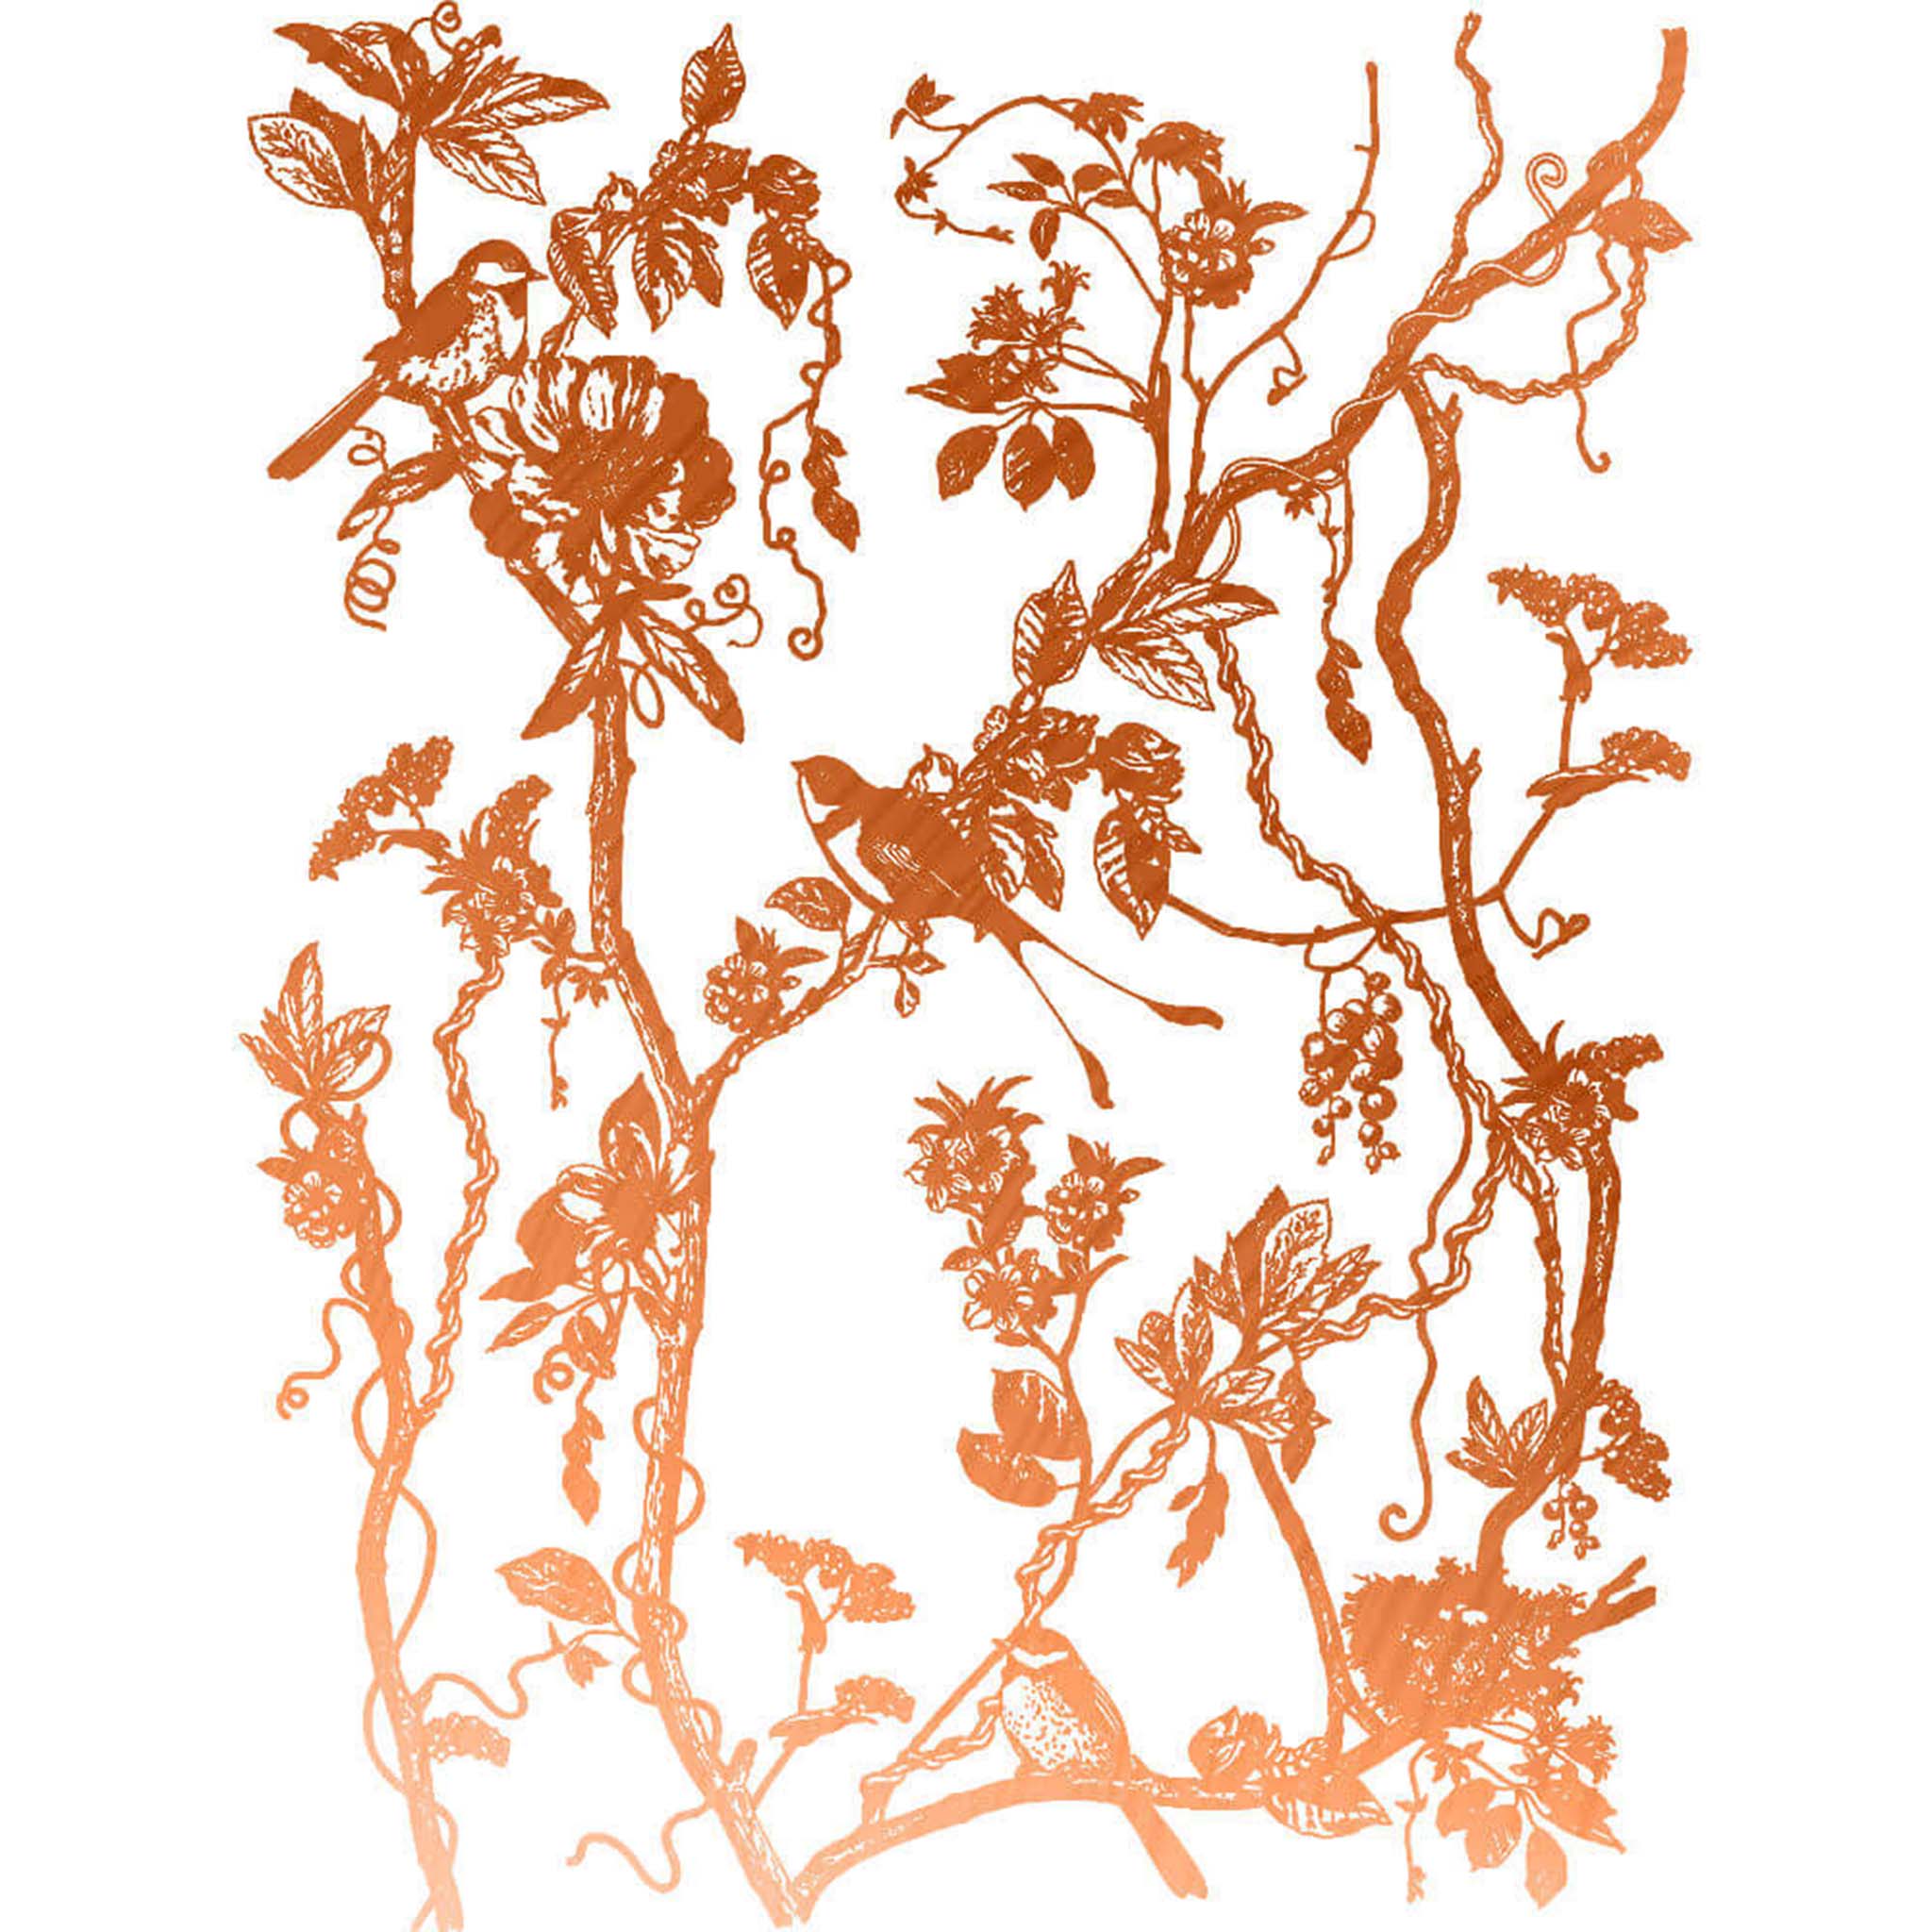 Copper foil transfer design featuring charming birds perched on blooming branches and vines is against a white background.